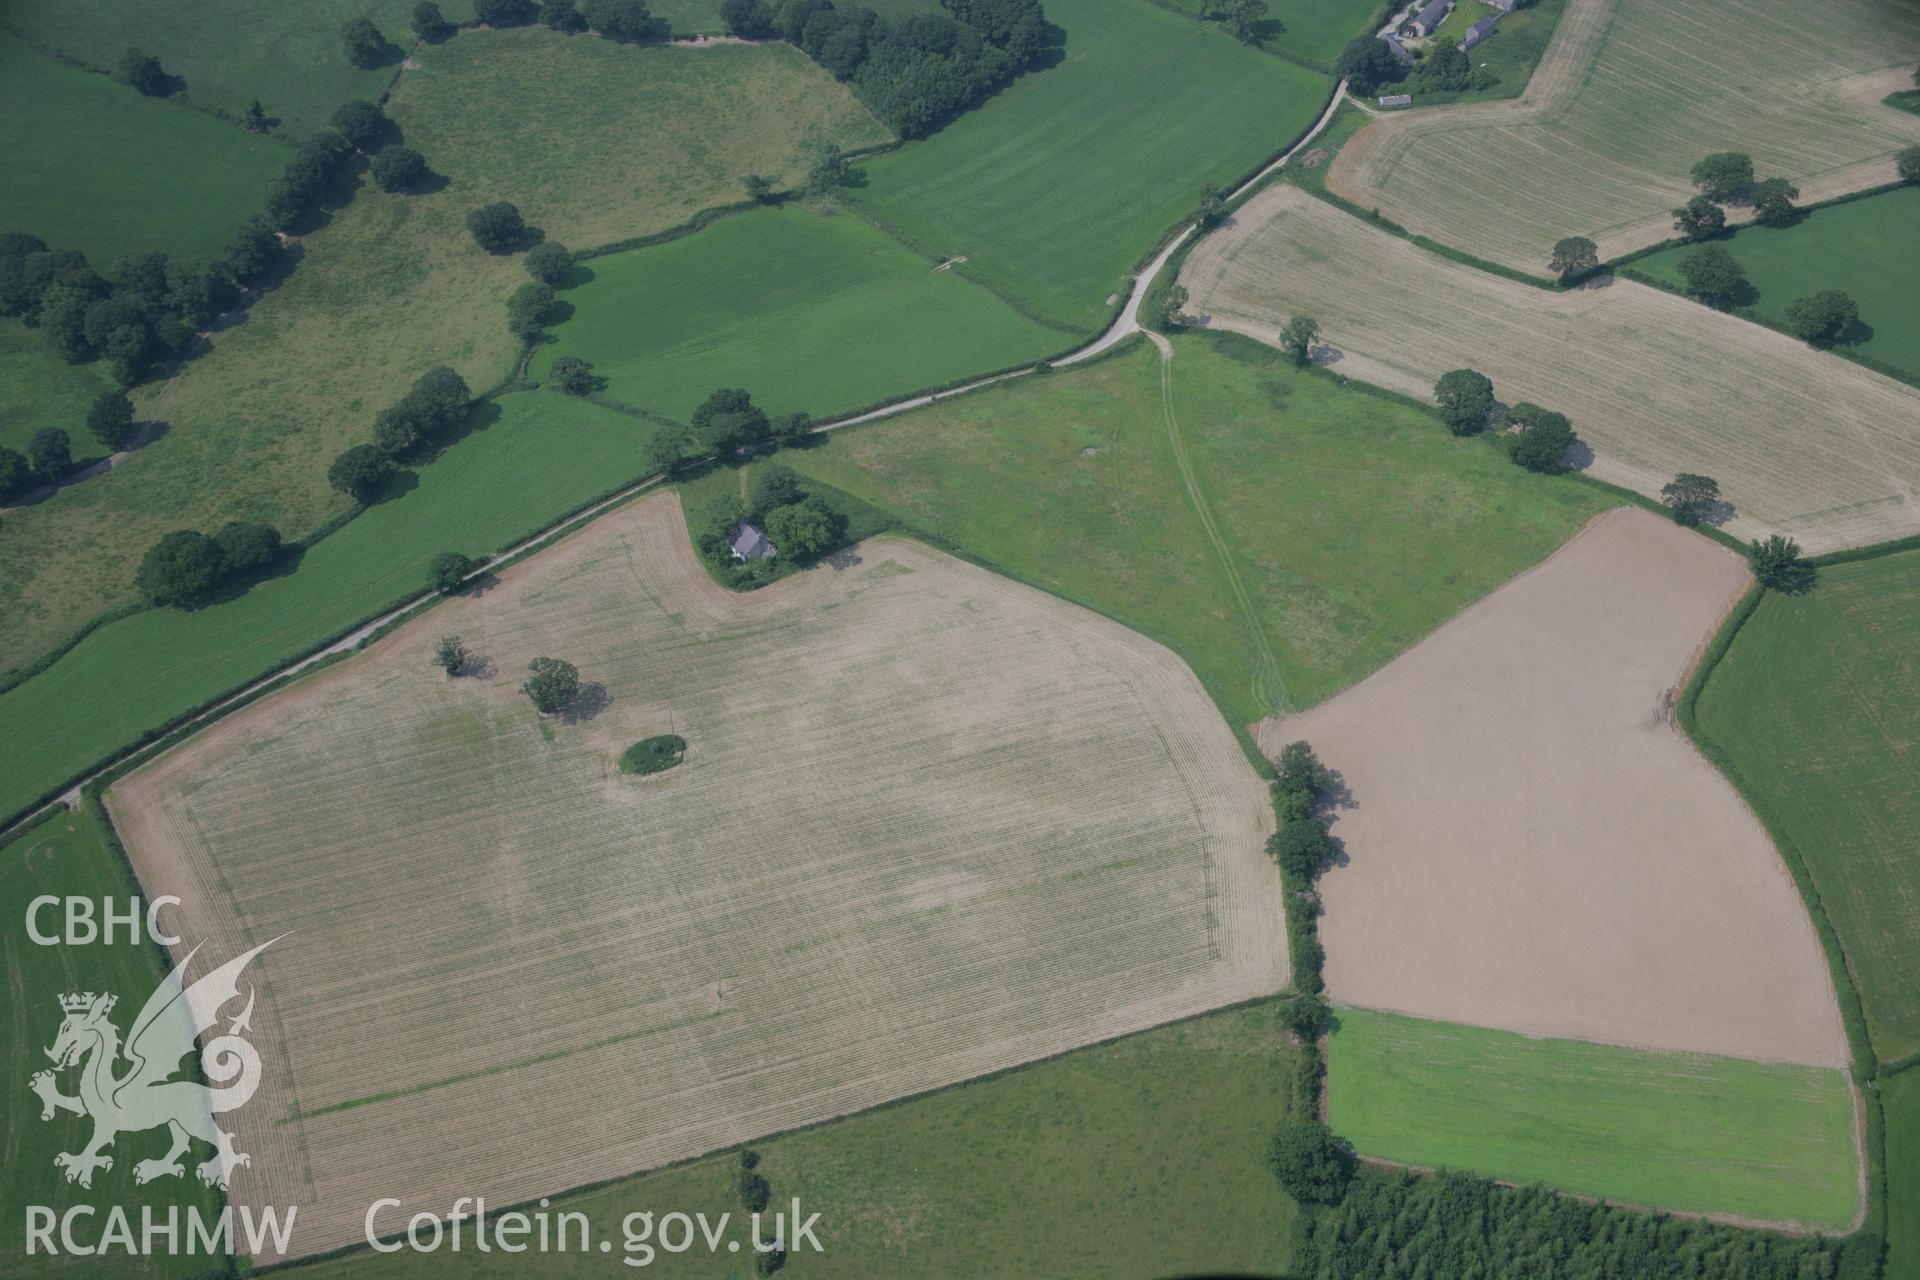 RCAHMW colour oblique aerial photograph of maize maze, Scurlage. Taken on 04 July 2006 by Toby Driver.